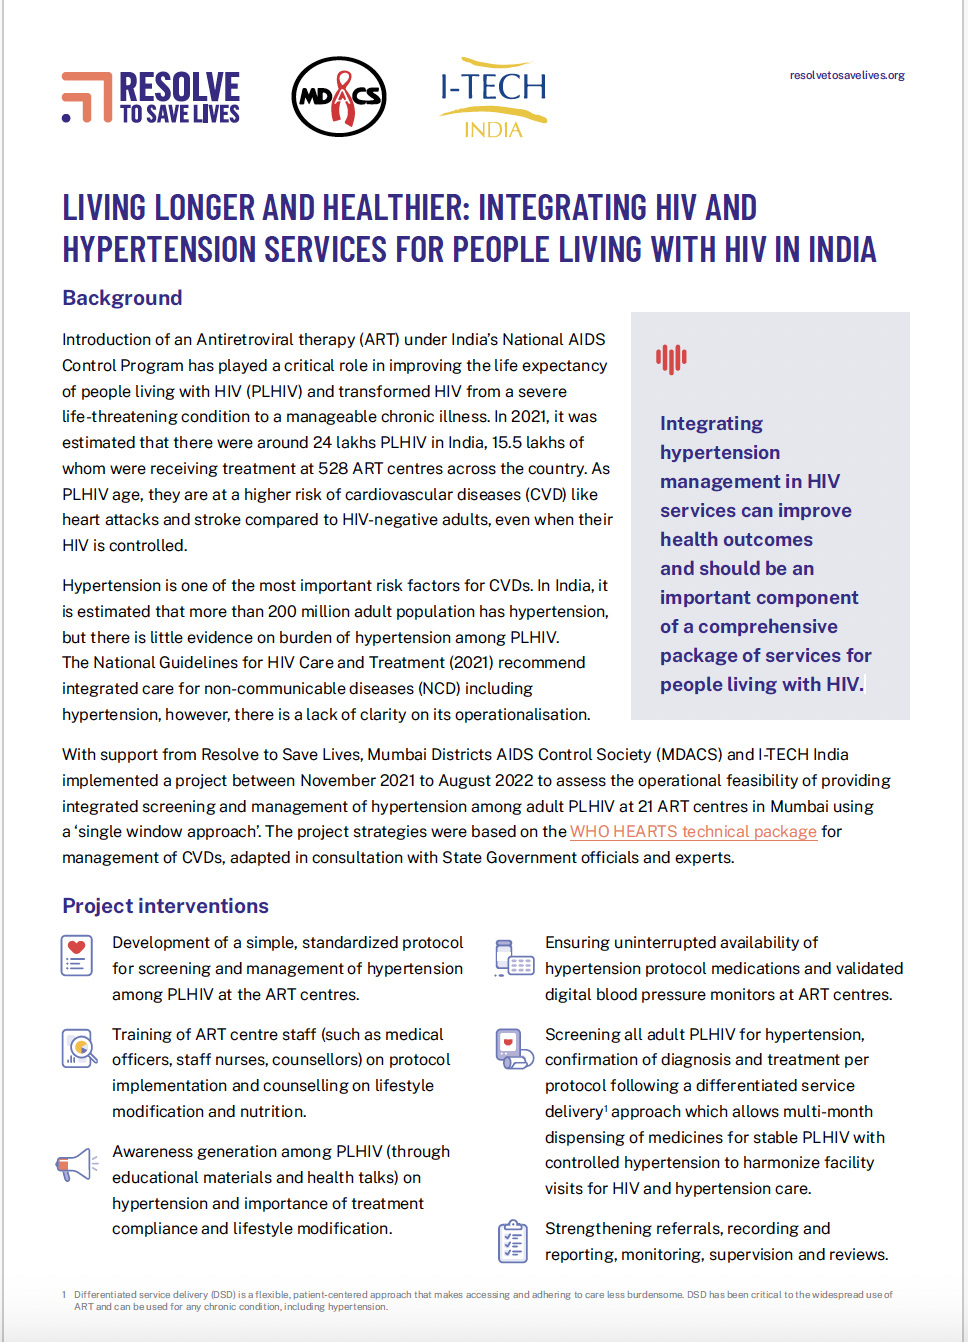 Cover image from LIVING LONGER AND HEALTHIER: INTEGRATING HIV AND HYPERTENSION SERVICES FOR PEOPLE LIVING WITH HIV IN INDIA from RTSL